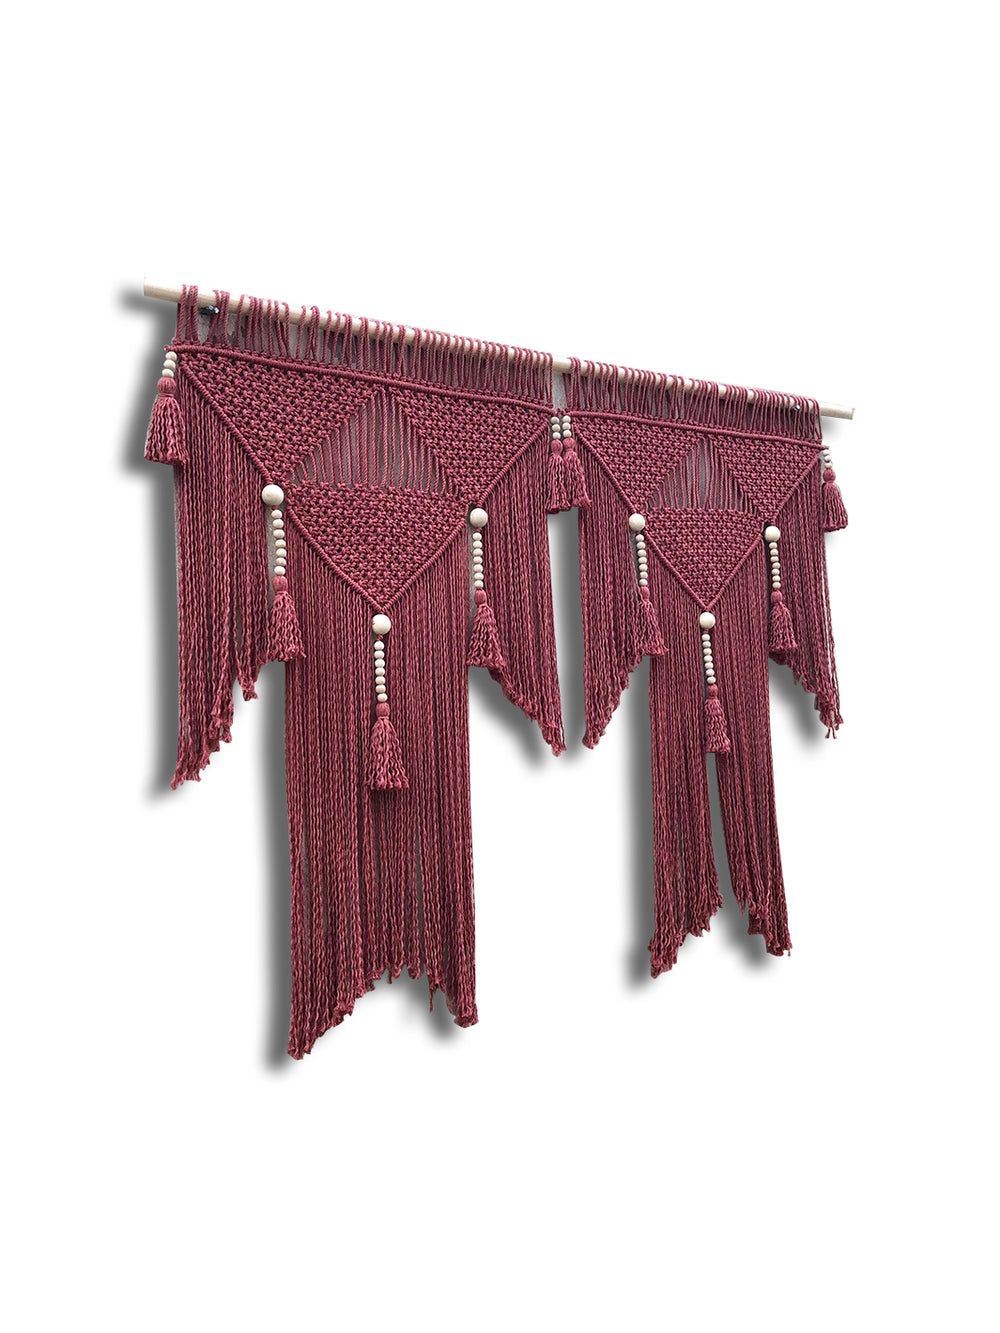 Handcrafted Terracotta Macrame Boho Hanging Woven Wall Decoration WallKnot Curtains & Drapes WKN0145-1